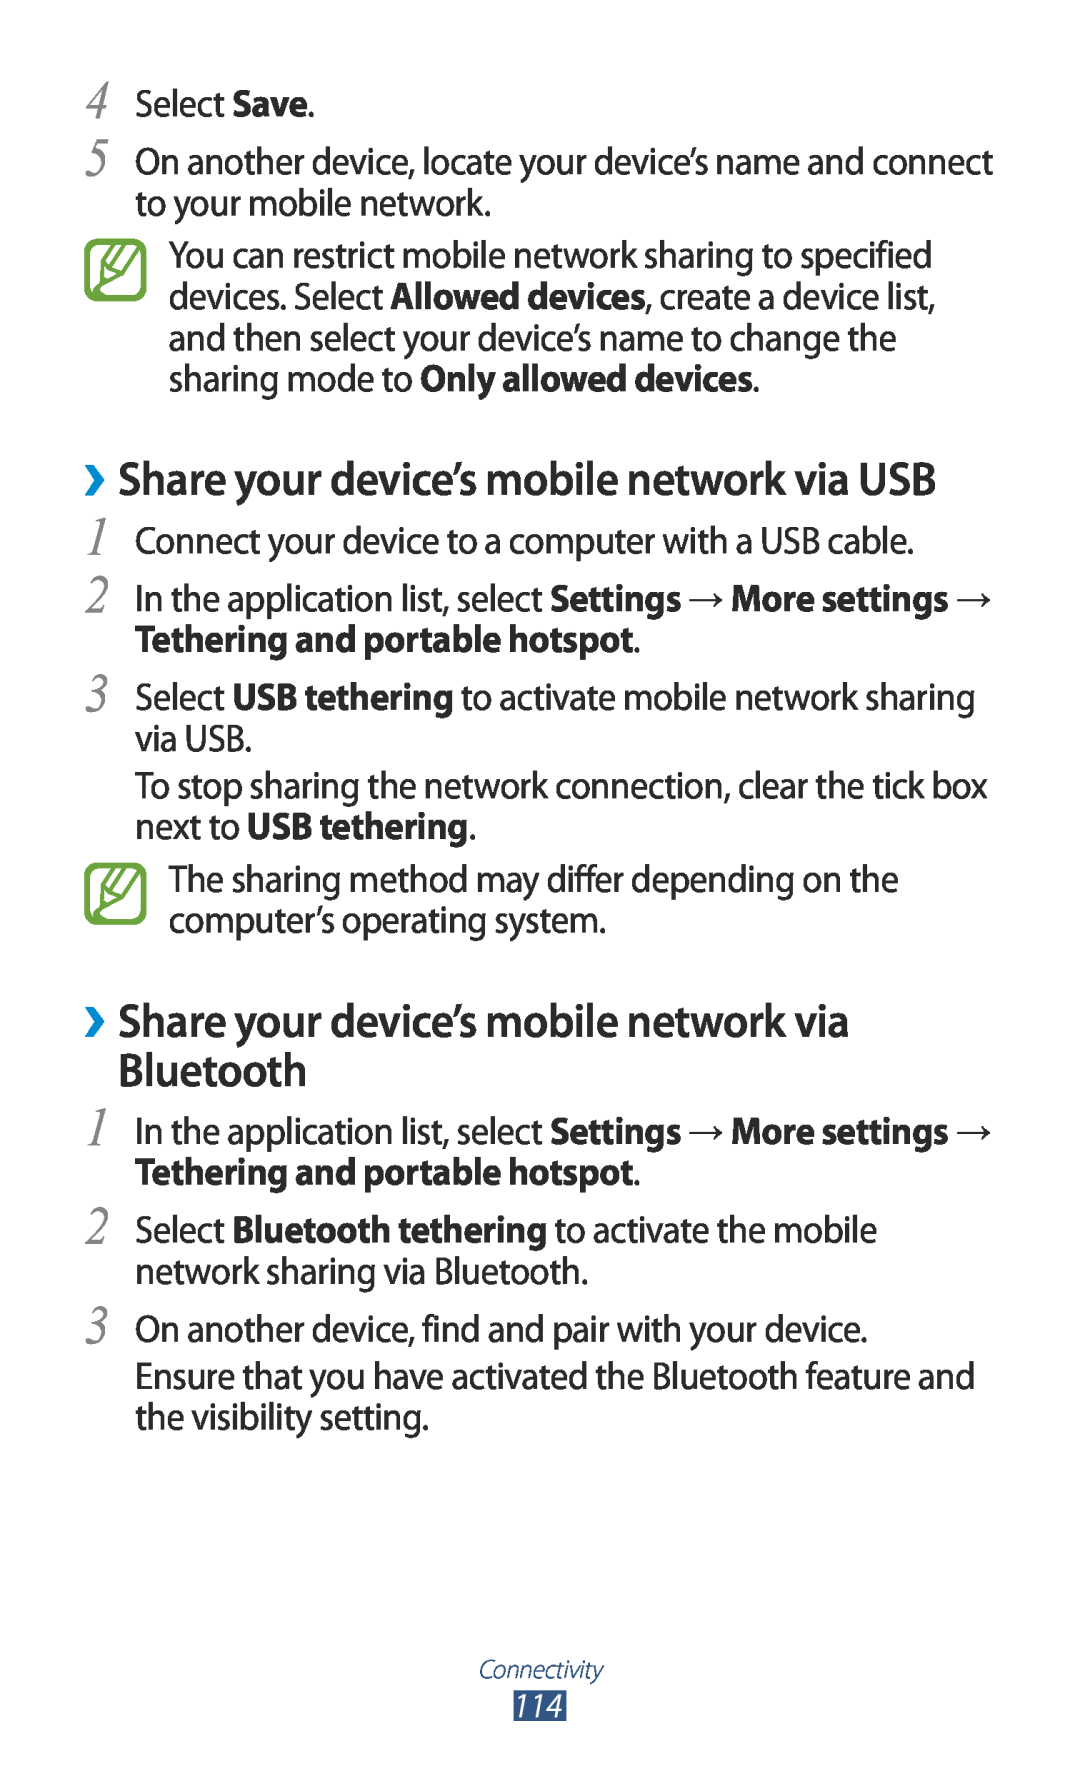 Samsung GT-S7560UWATWO ››Share your device’s mobile network via Bluetooth, ››Share your device’s mobile network via USB 